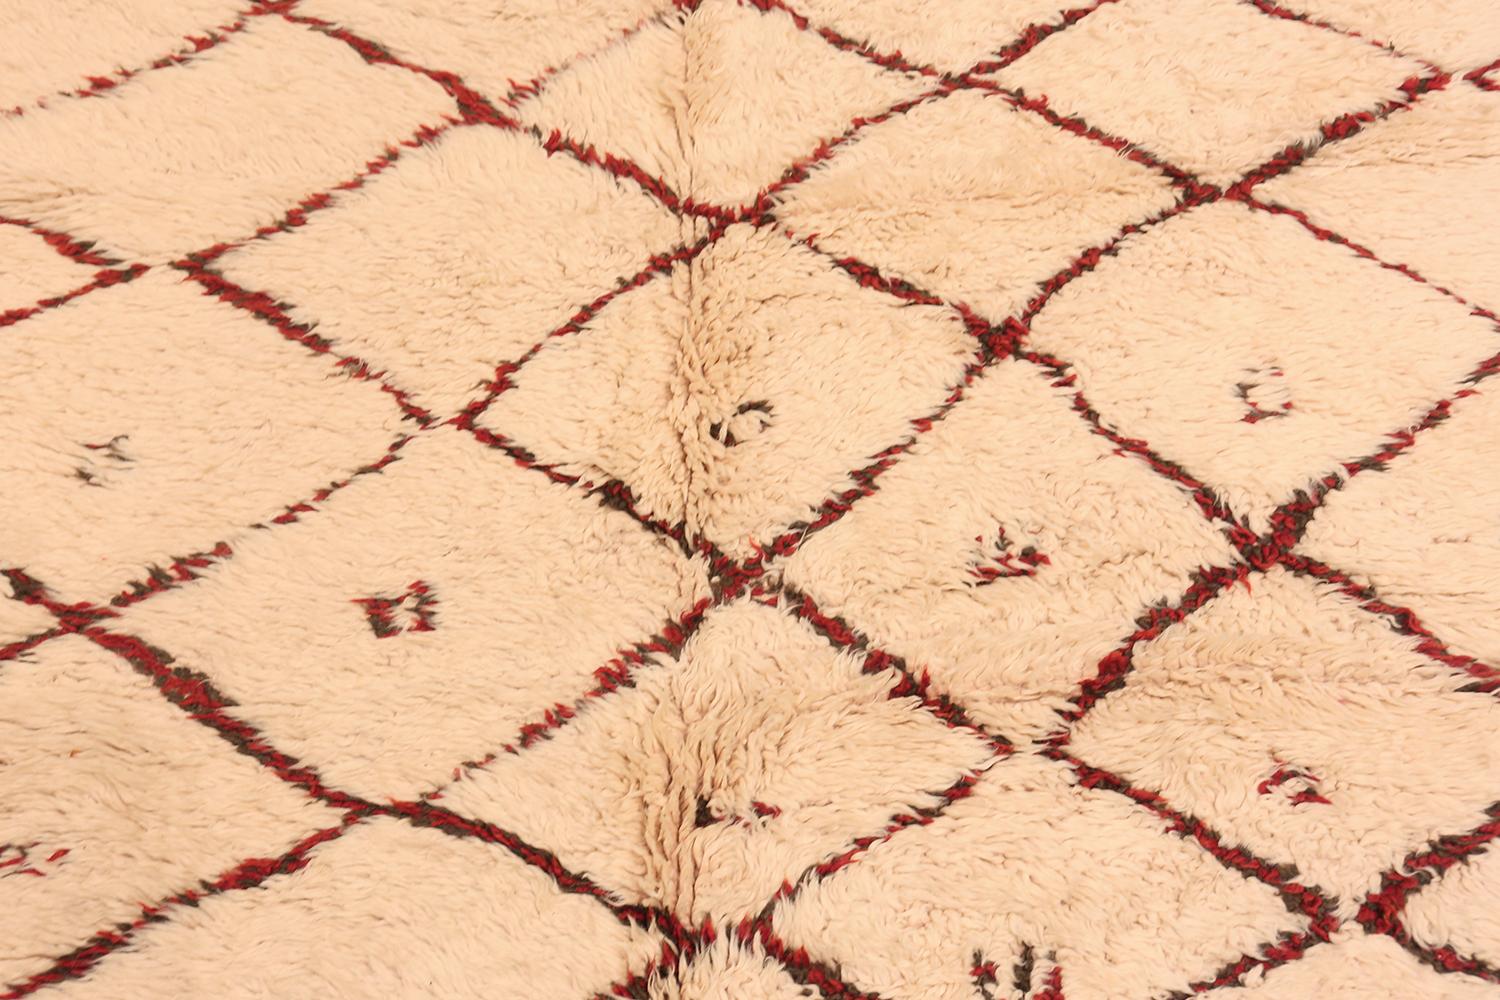 Beautiful vintage gallery size Moroccan Berber rug, country of origin: Morocco, date circa mid-20th century. Size: 6 ft. 6 in x 16 ft. 7 in (1.98 m x 5.05 m). This vintage mid-20th century Moroccan rug is a breathtaking piece and a rare find. The